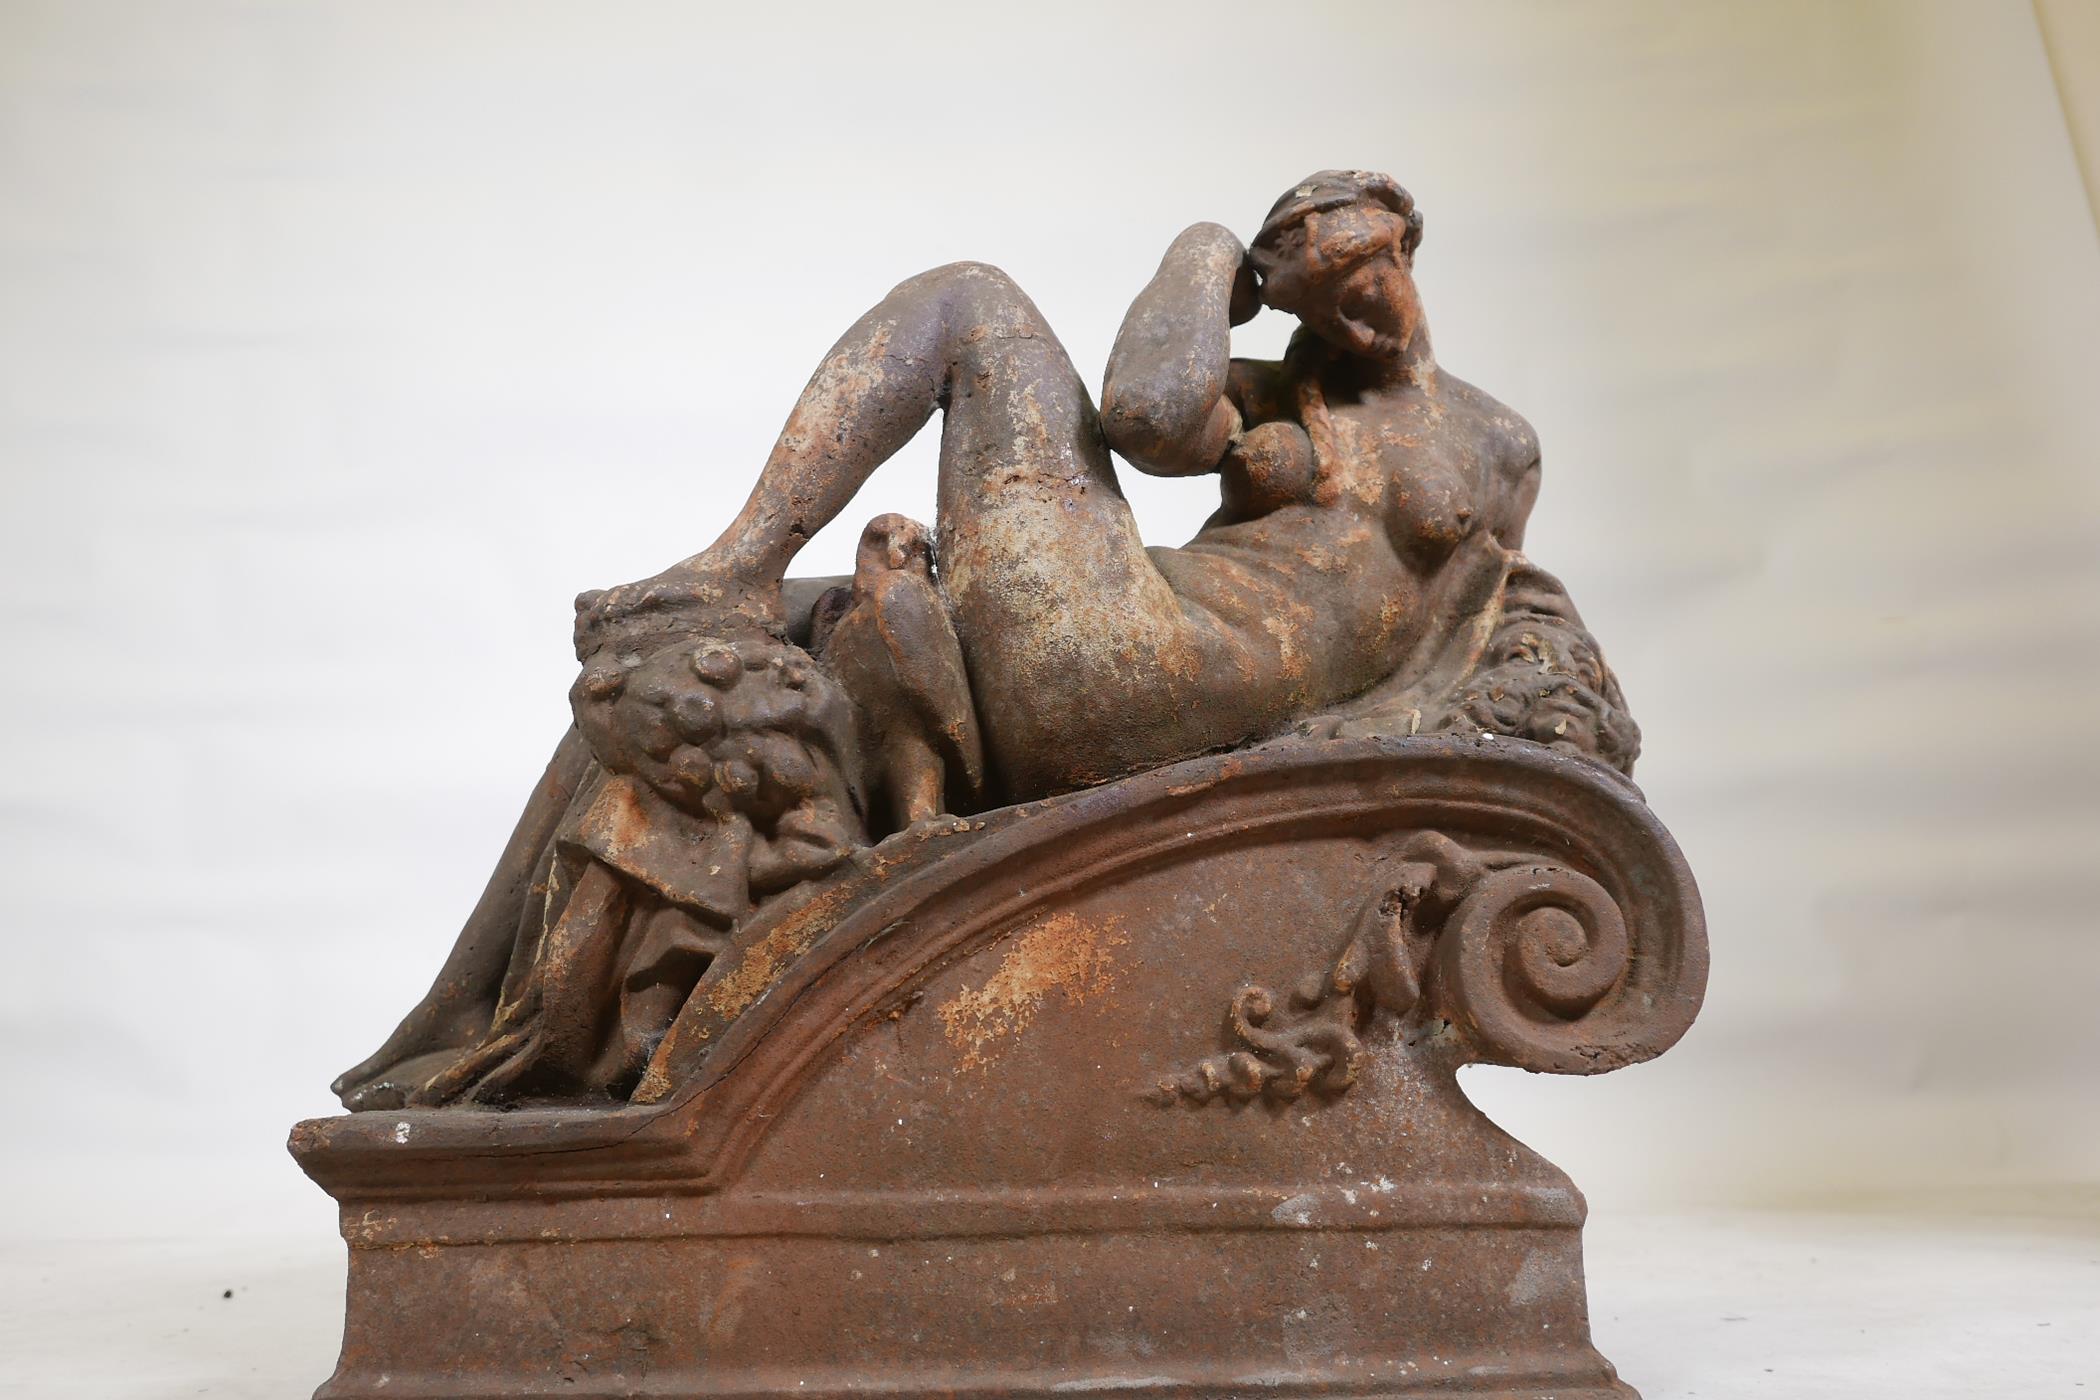 An early C19th hollow cast iron architectural feature in the form of a classical nude, remnants of - Image 4 of 5